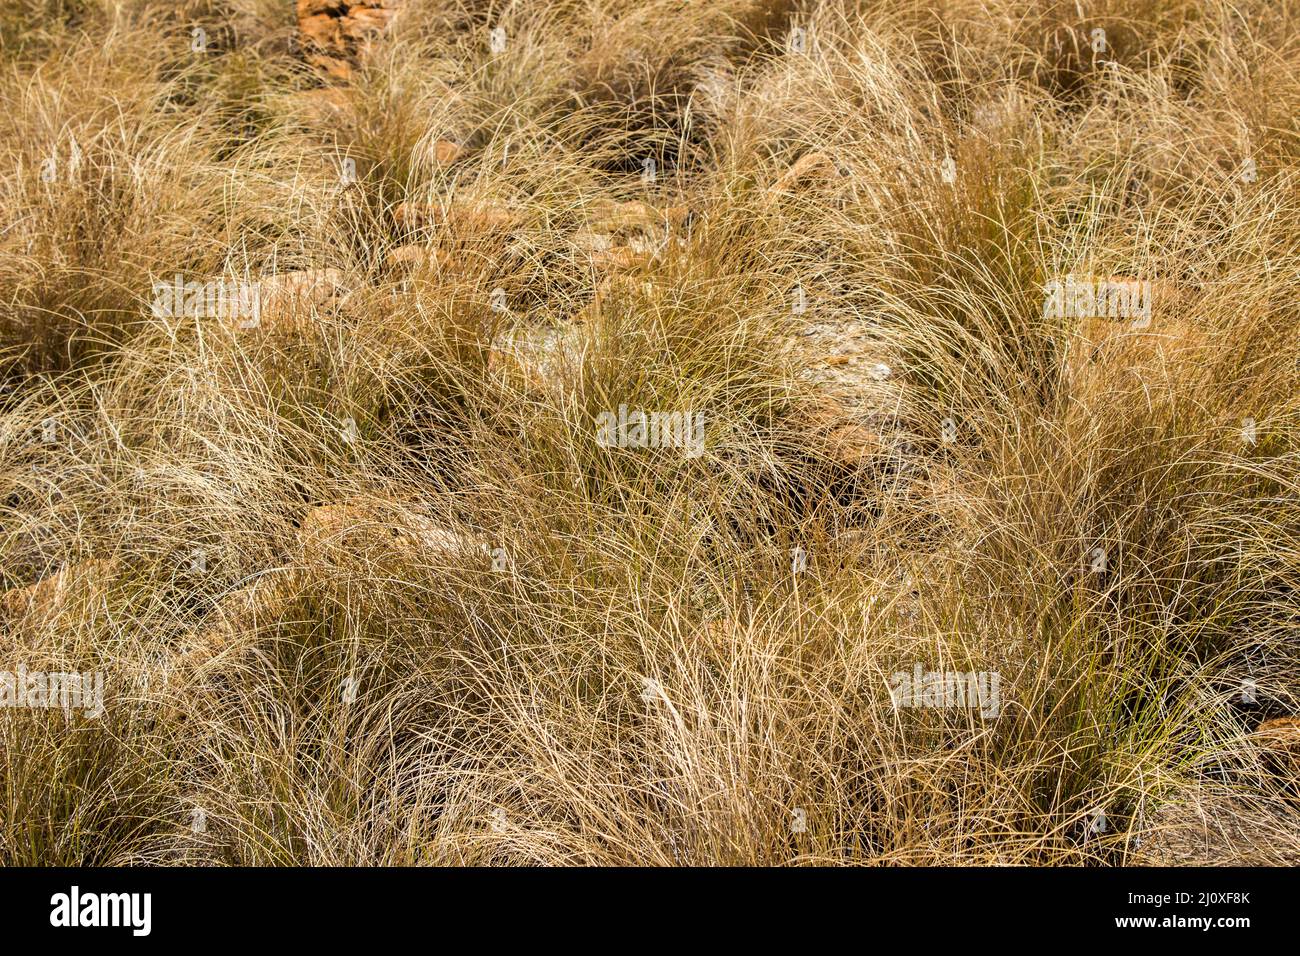 A tangle of Tussock grasses in the Magaliesberg Mountains of South Africa Stock Photo